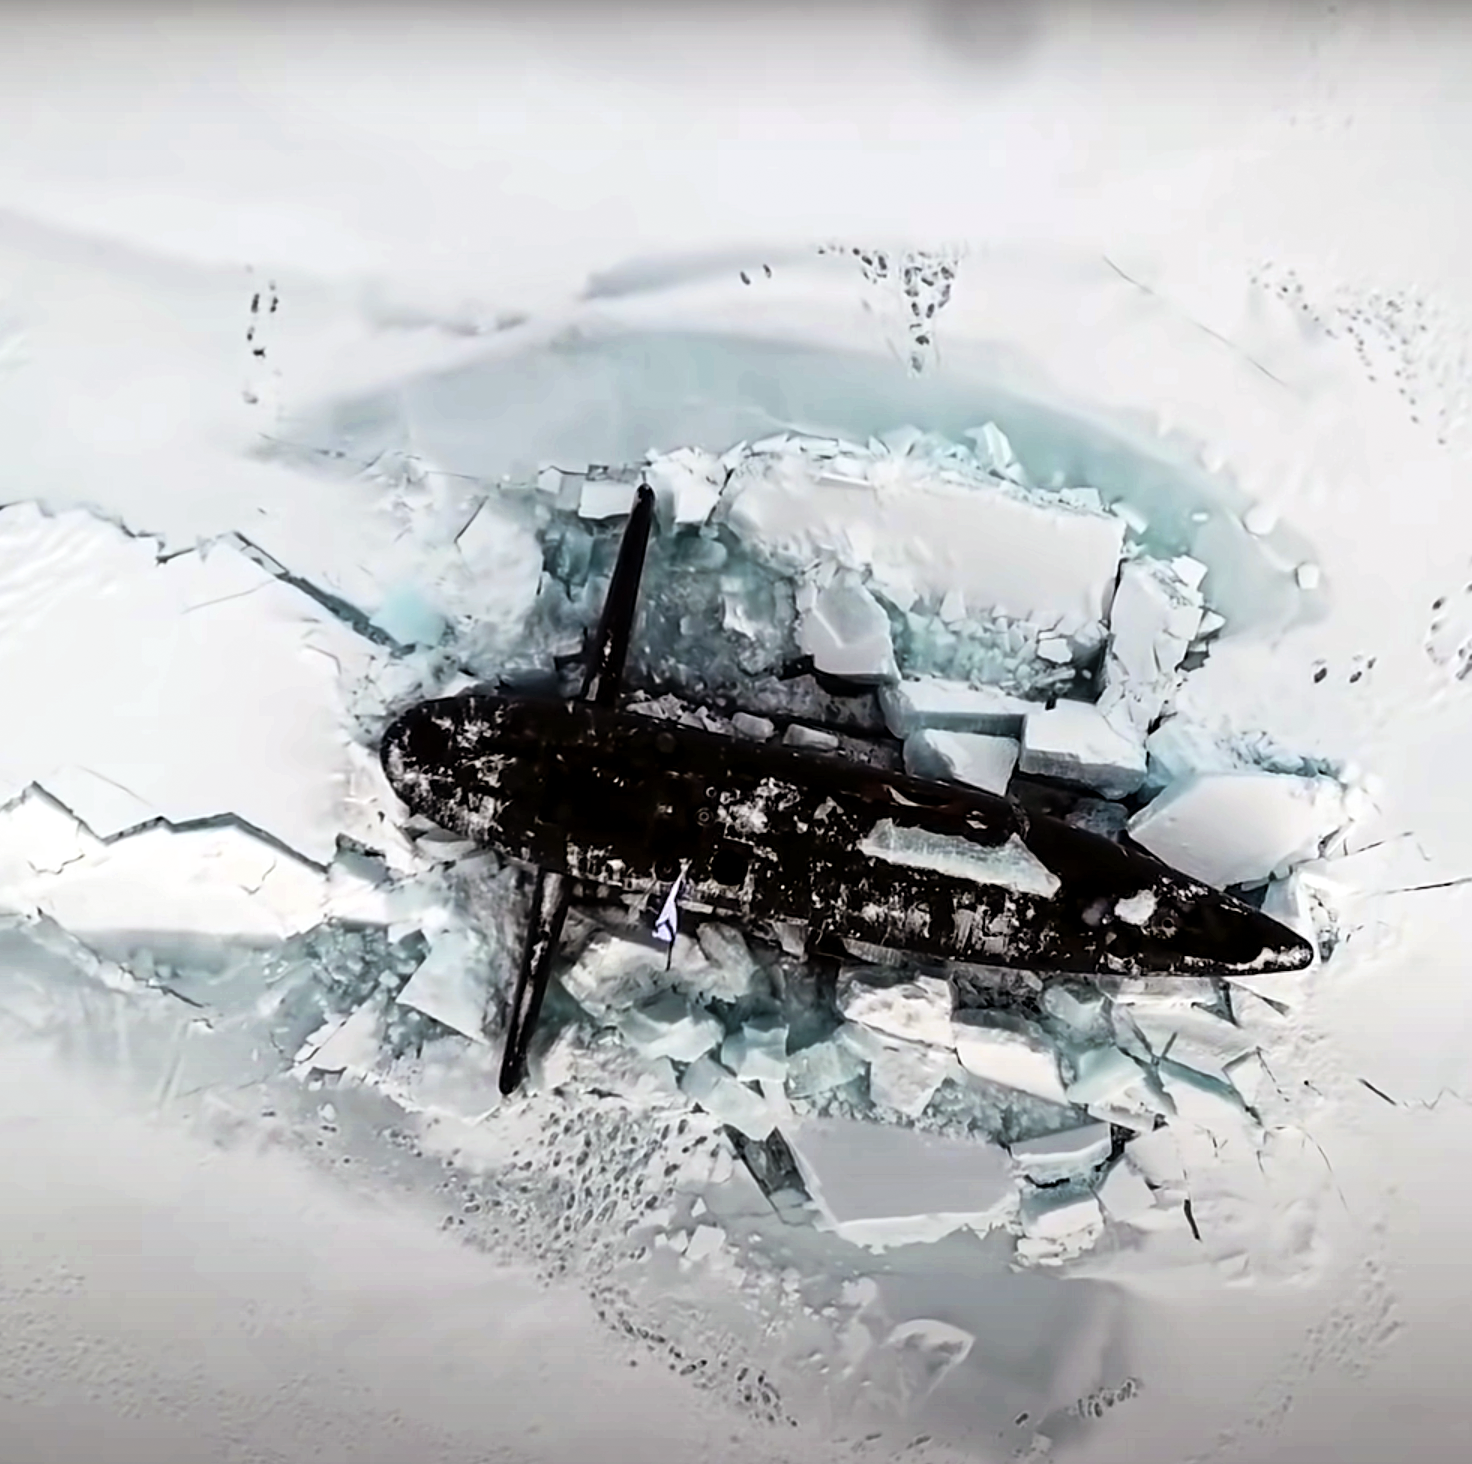 Watch 3 Russian Nuclear Submarines Smash Through Arctic Ice at Once